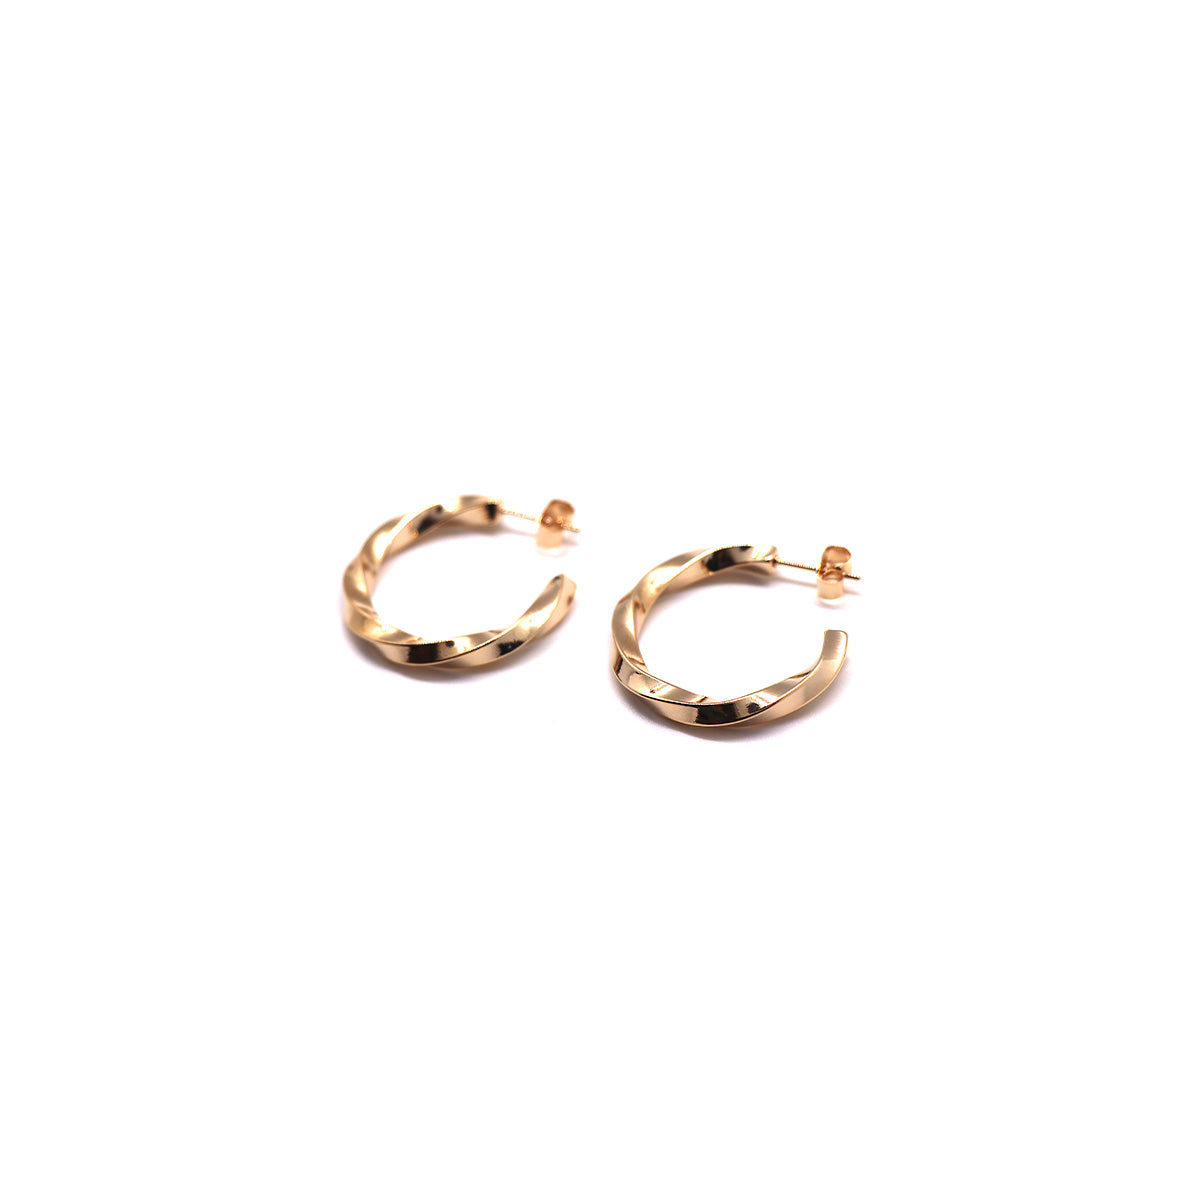 1" and 1.5" Twisted gold hoop earrings